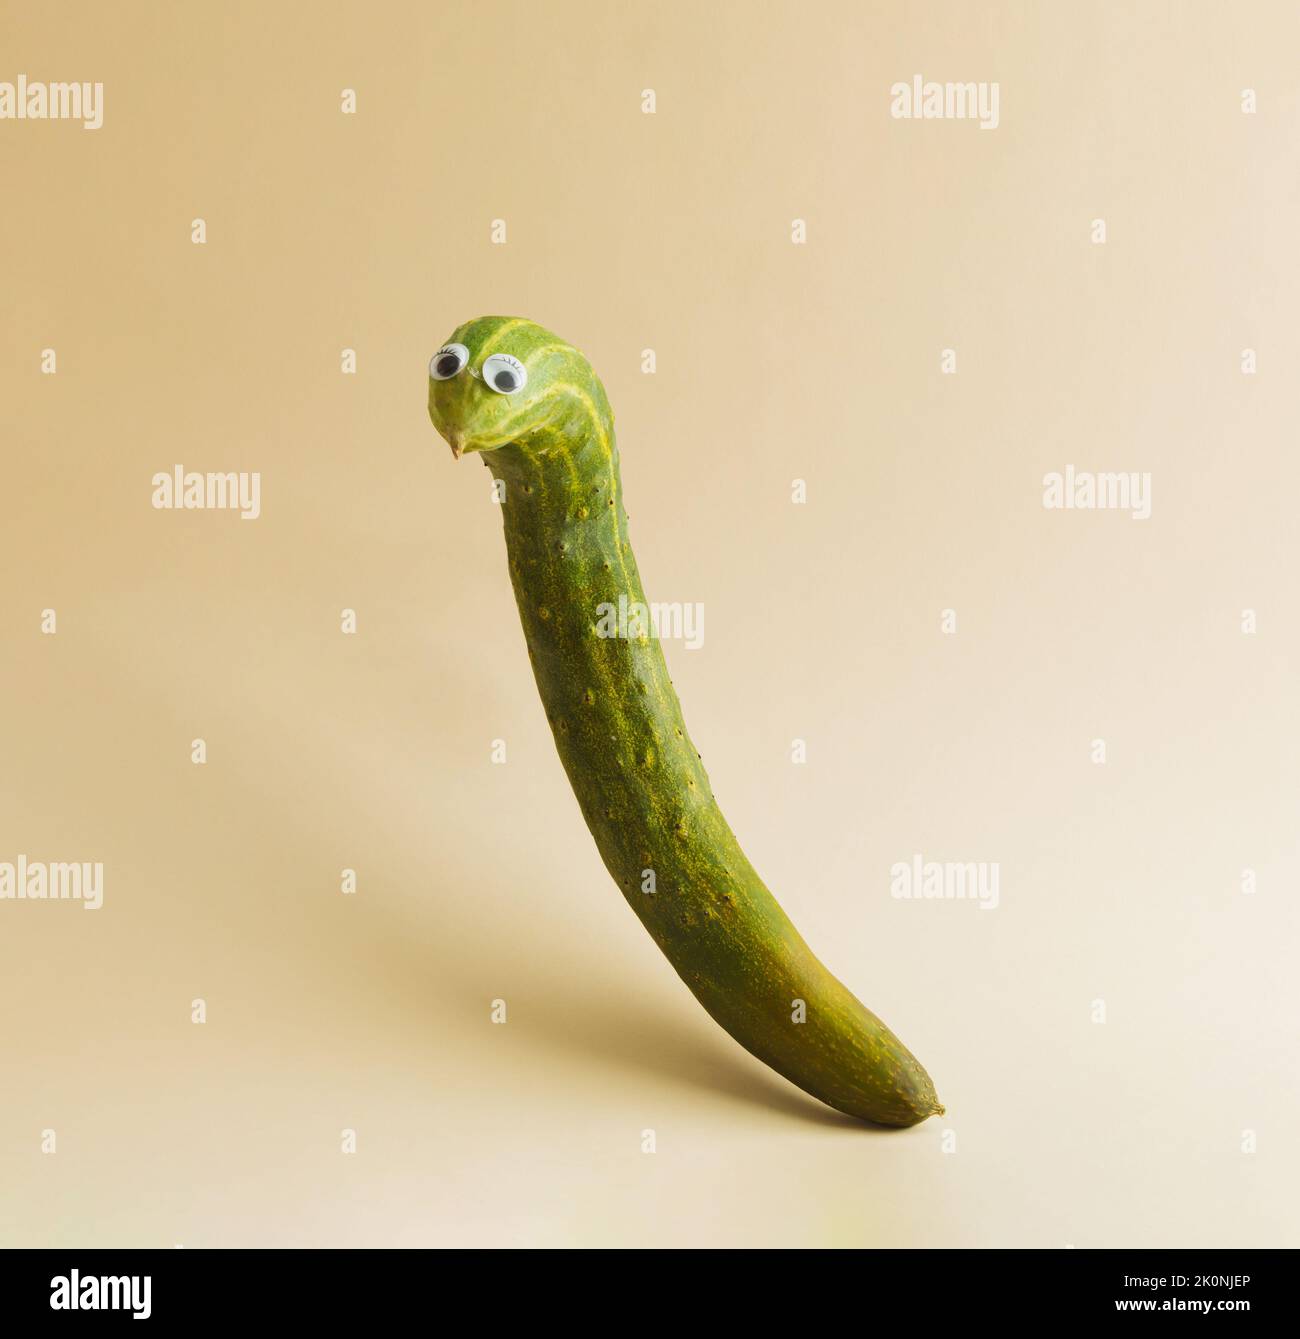 Funny cucumber with eyes on beige background. Halloween holiday idea. Creative still life, copy space. Stock Photo